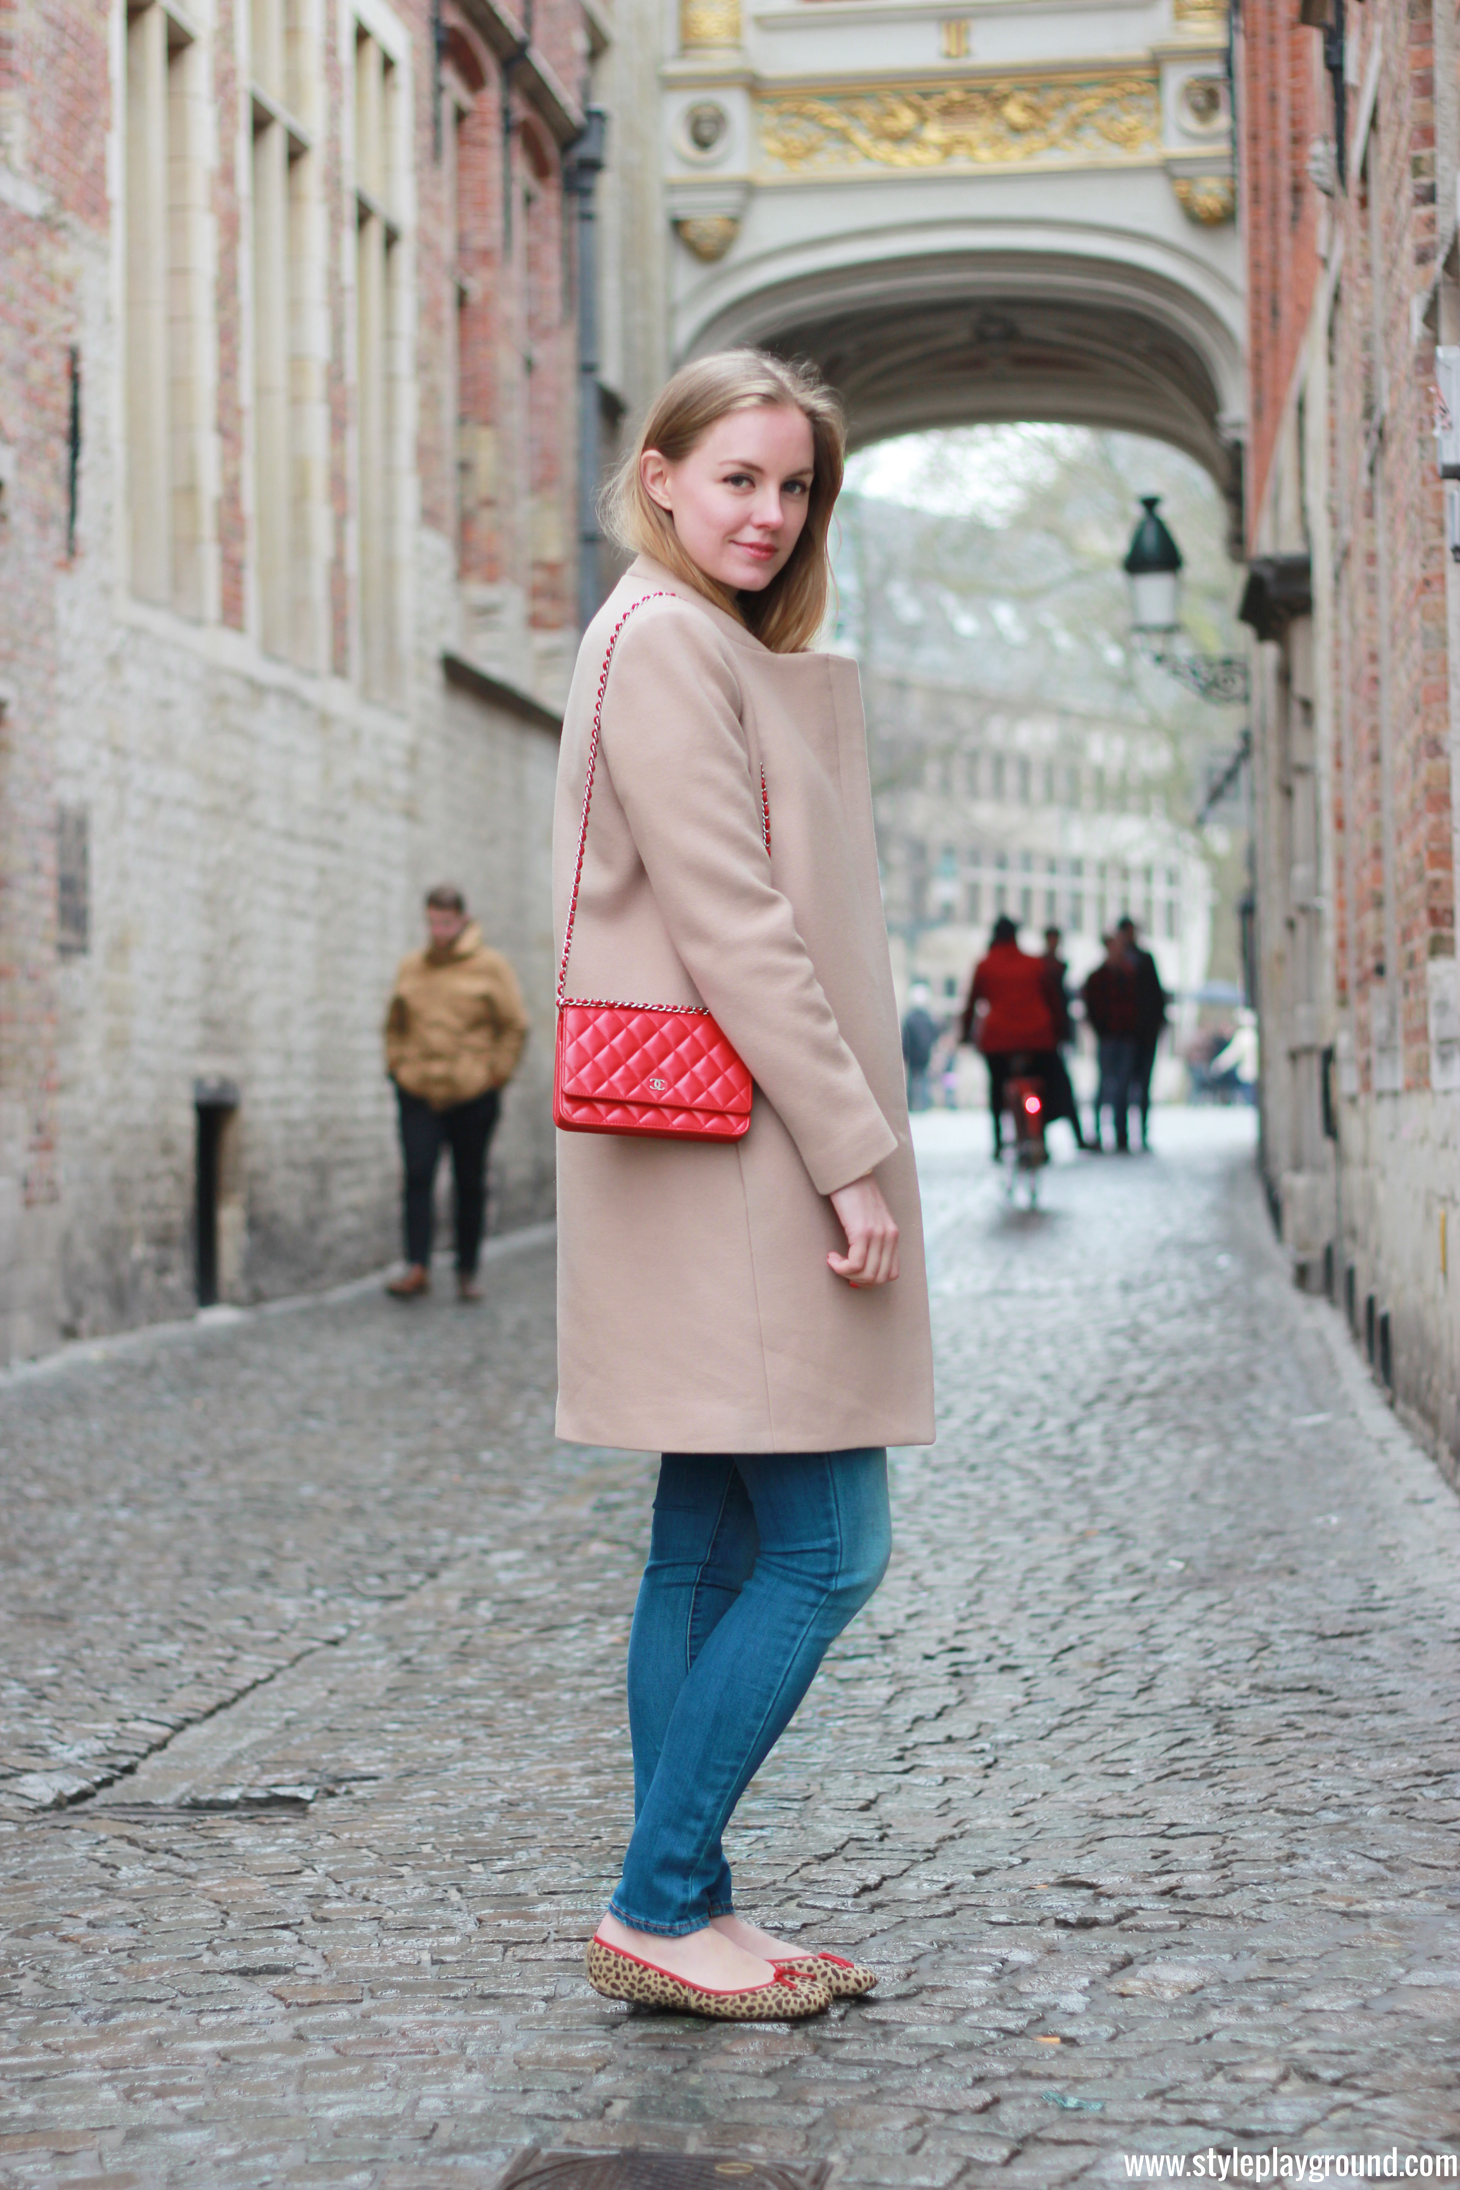 Axelle Blanpain of Style playground is wearing a Zara coat, American Eagle jeggings, French sole flats and Chanel WOC